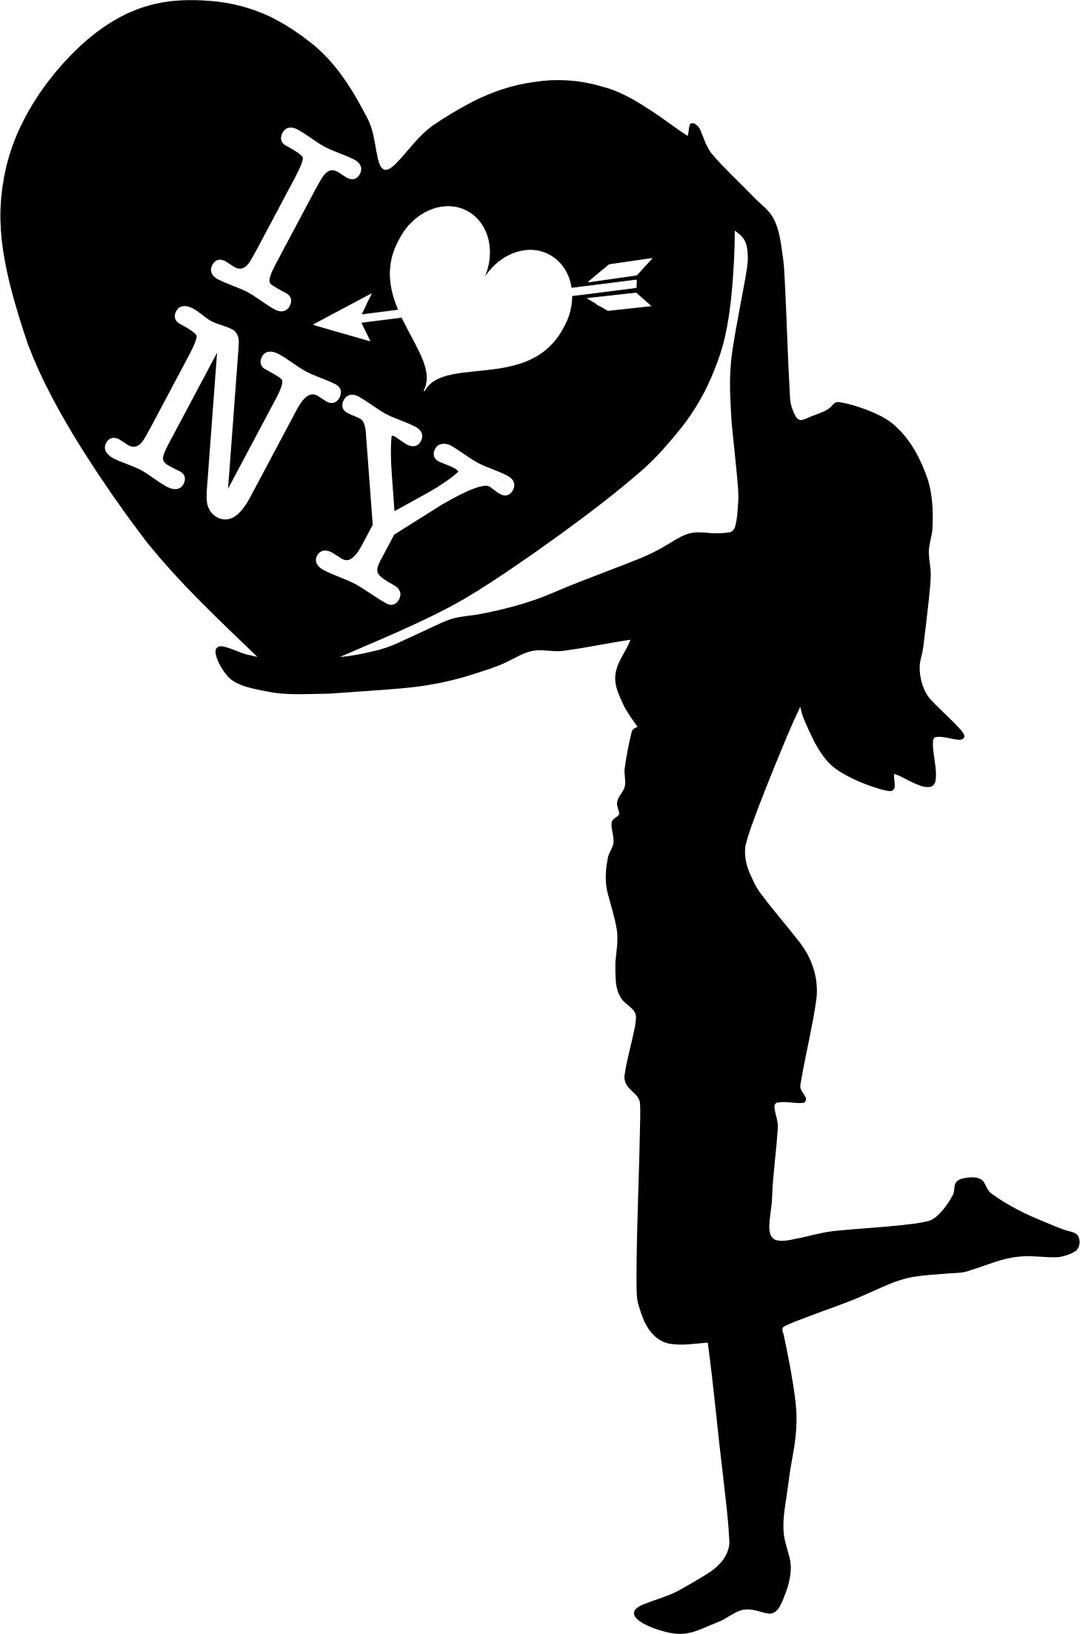 Woman With Big Heart Loves NY Black And White png transparent